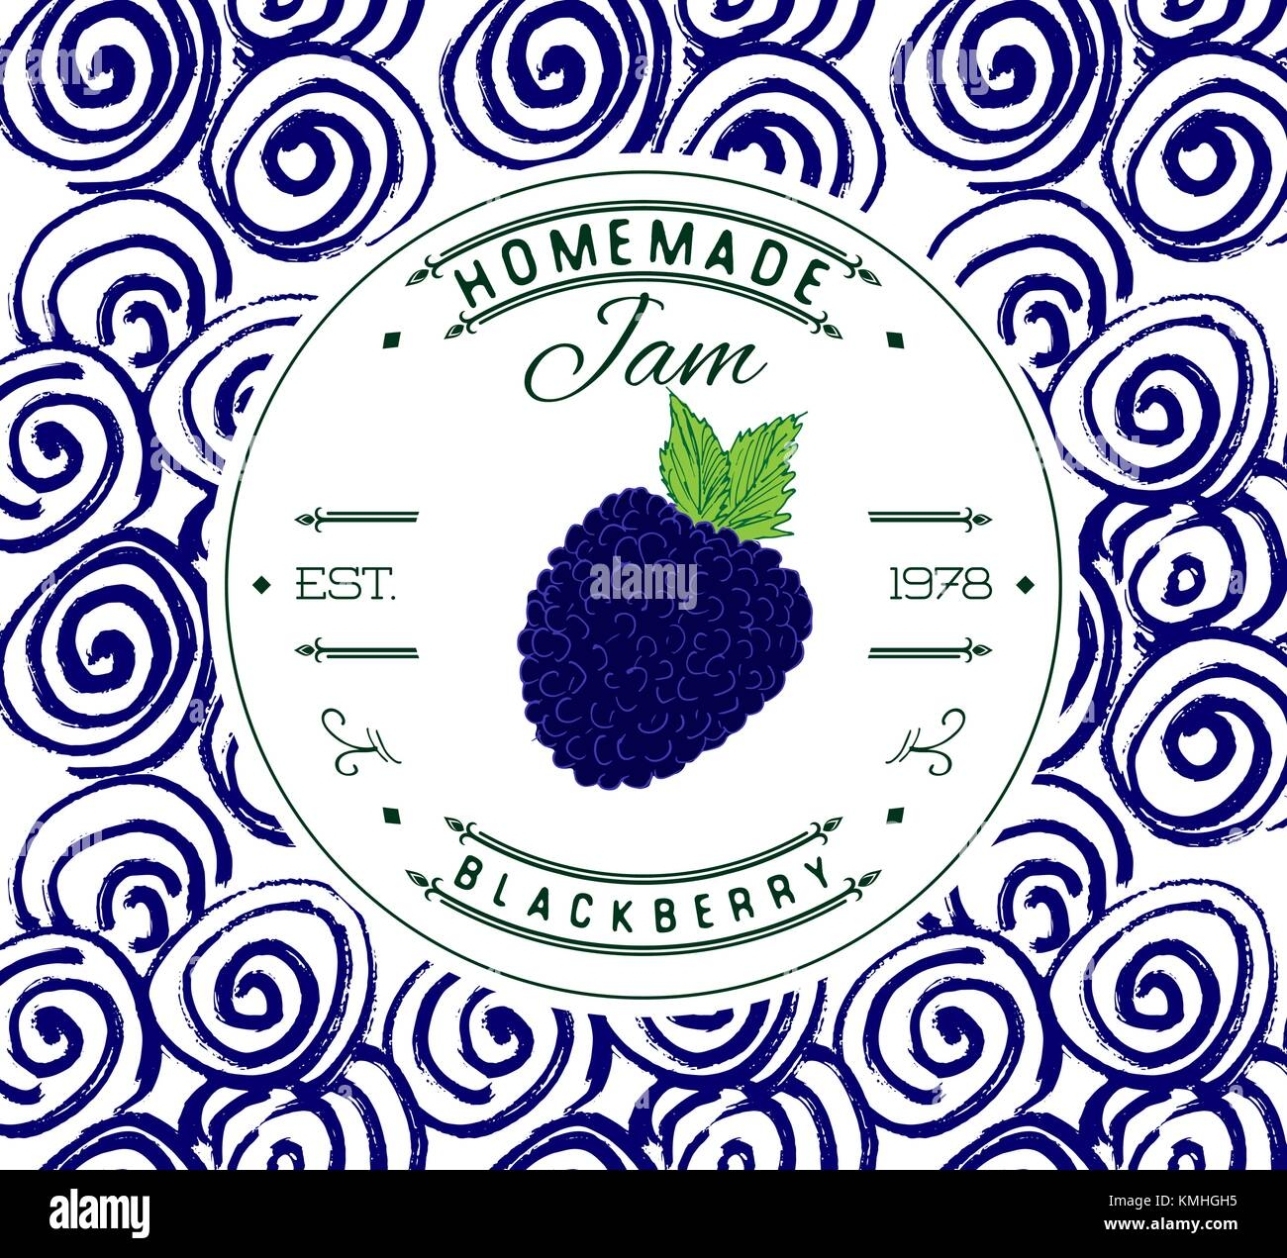 Jam Label Design Template. For Blackberry Dessert Product With Hand Throughout Dessert Labels Template